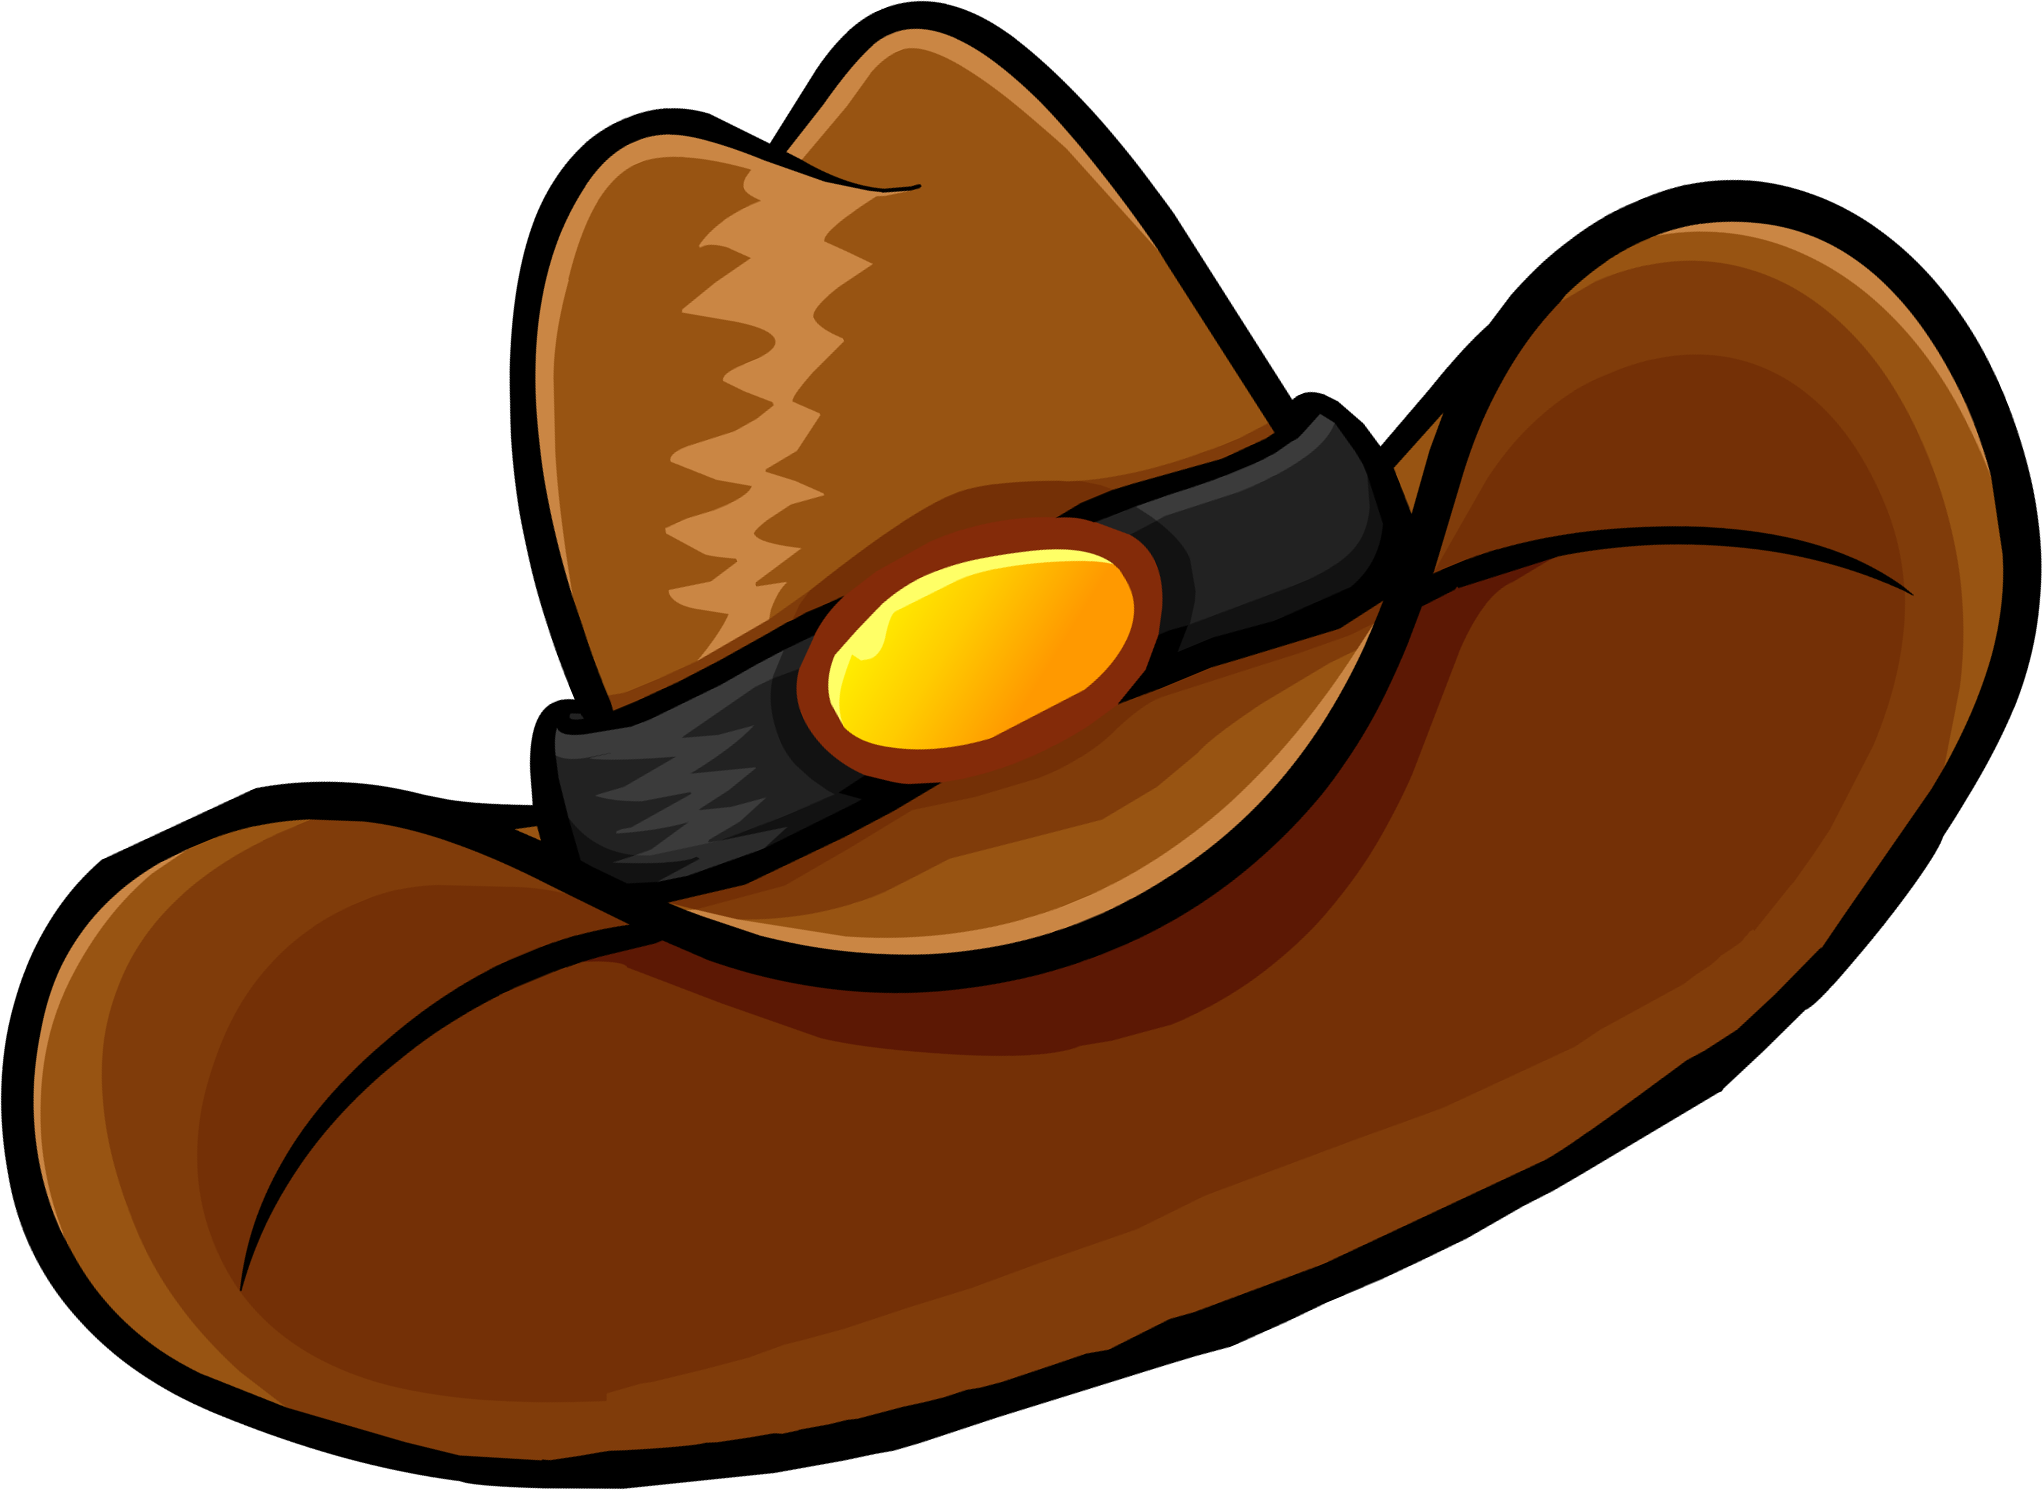 western hat clipart - photo #19